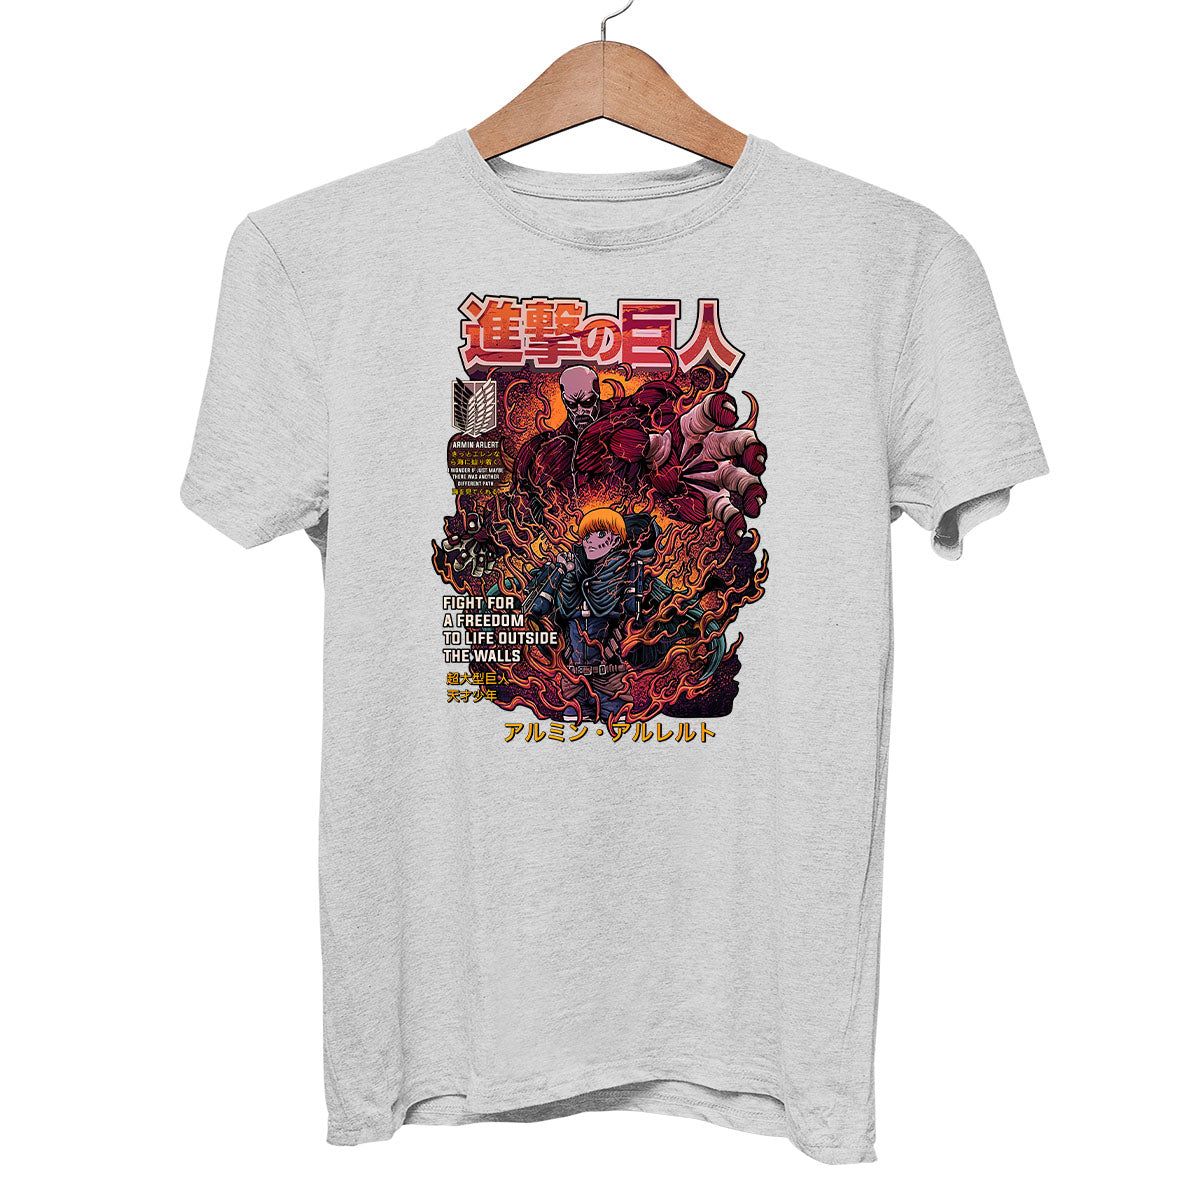 Attack On Titan Anime Fight For A Freedom To Life Outside The Walls Adult Unisex Grey Tee